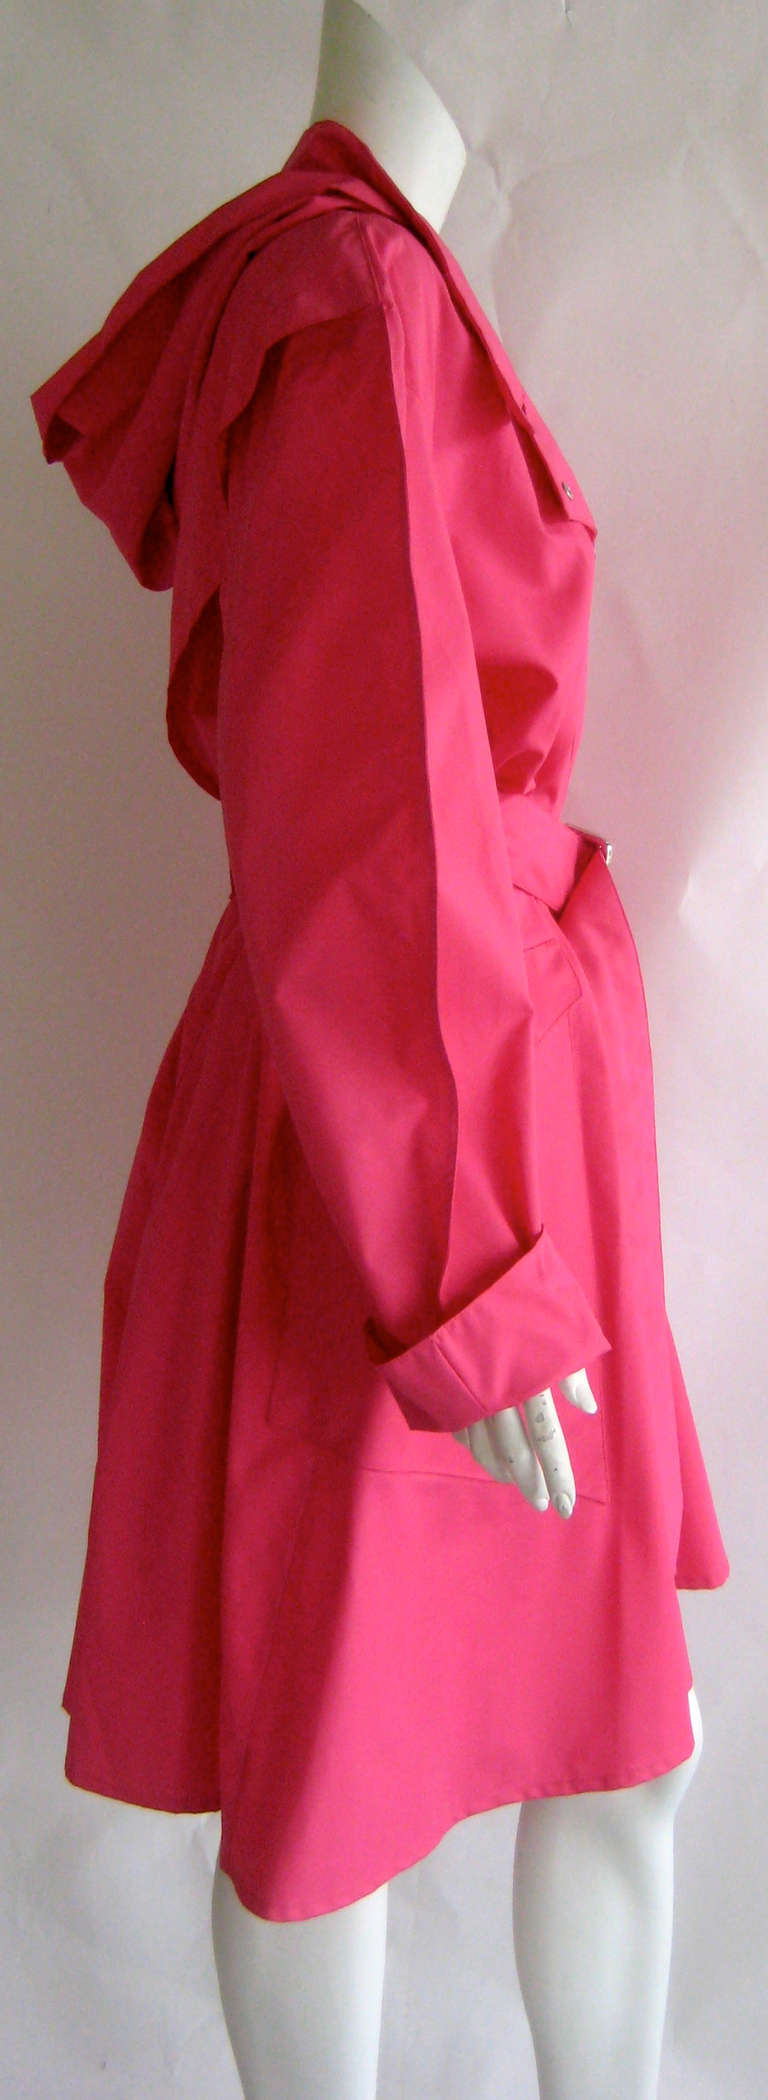 Fabulous hot pink Thierry Mugler raincoat with detachable hood
Snaps up the front with pink snaps
Hood snaps on and off
Matching self belt
2 side slant pockets close with snaps
Polymide /rayon combo
Unworn dead stock piece .This still has the